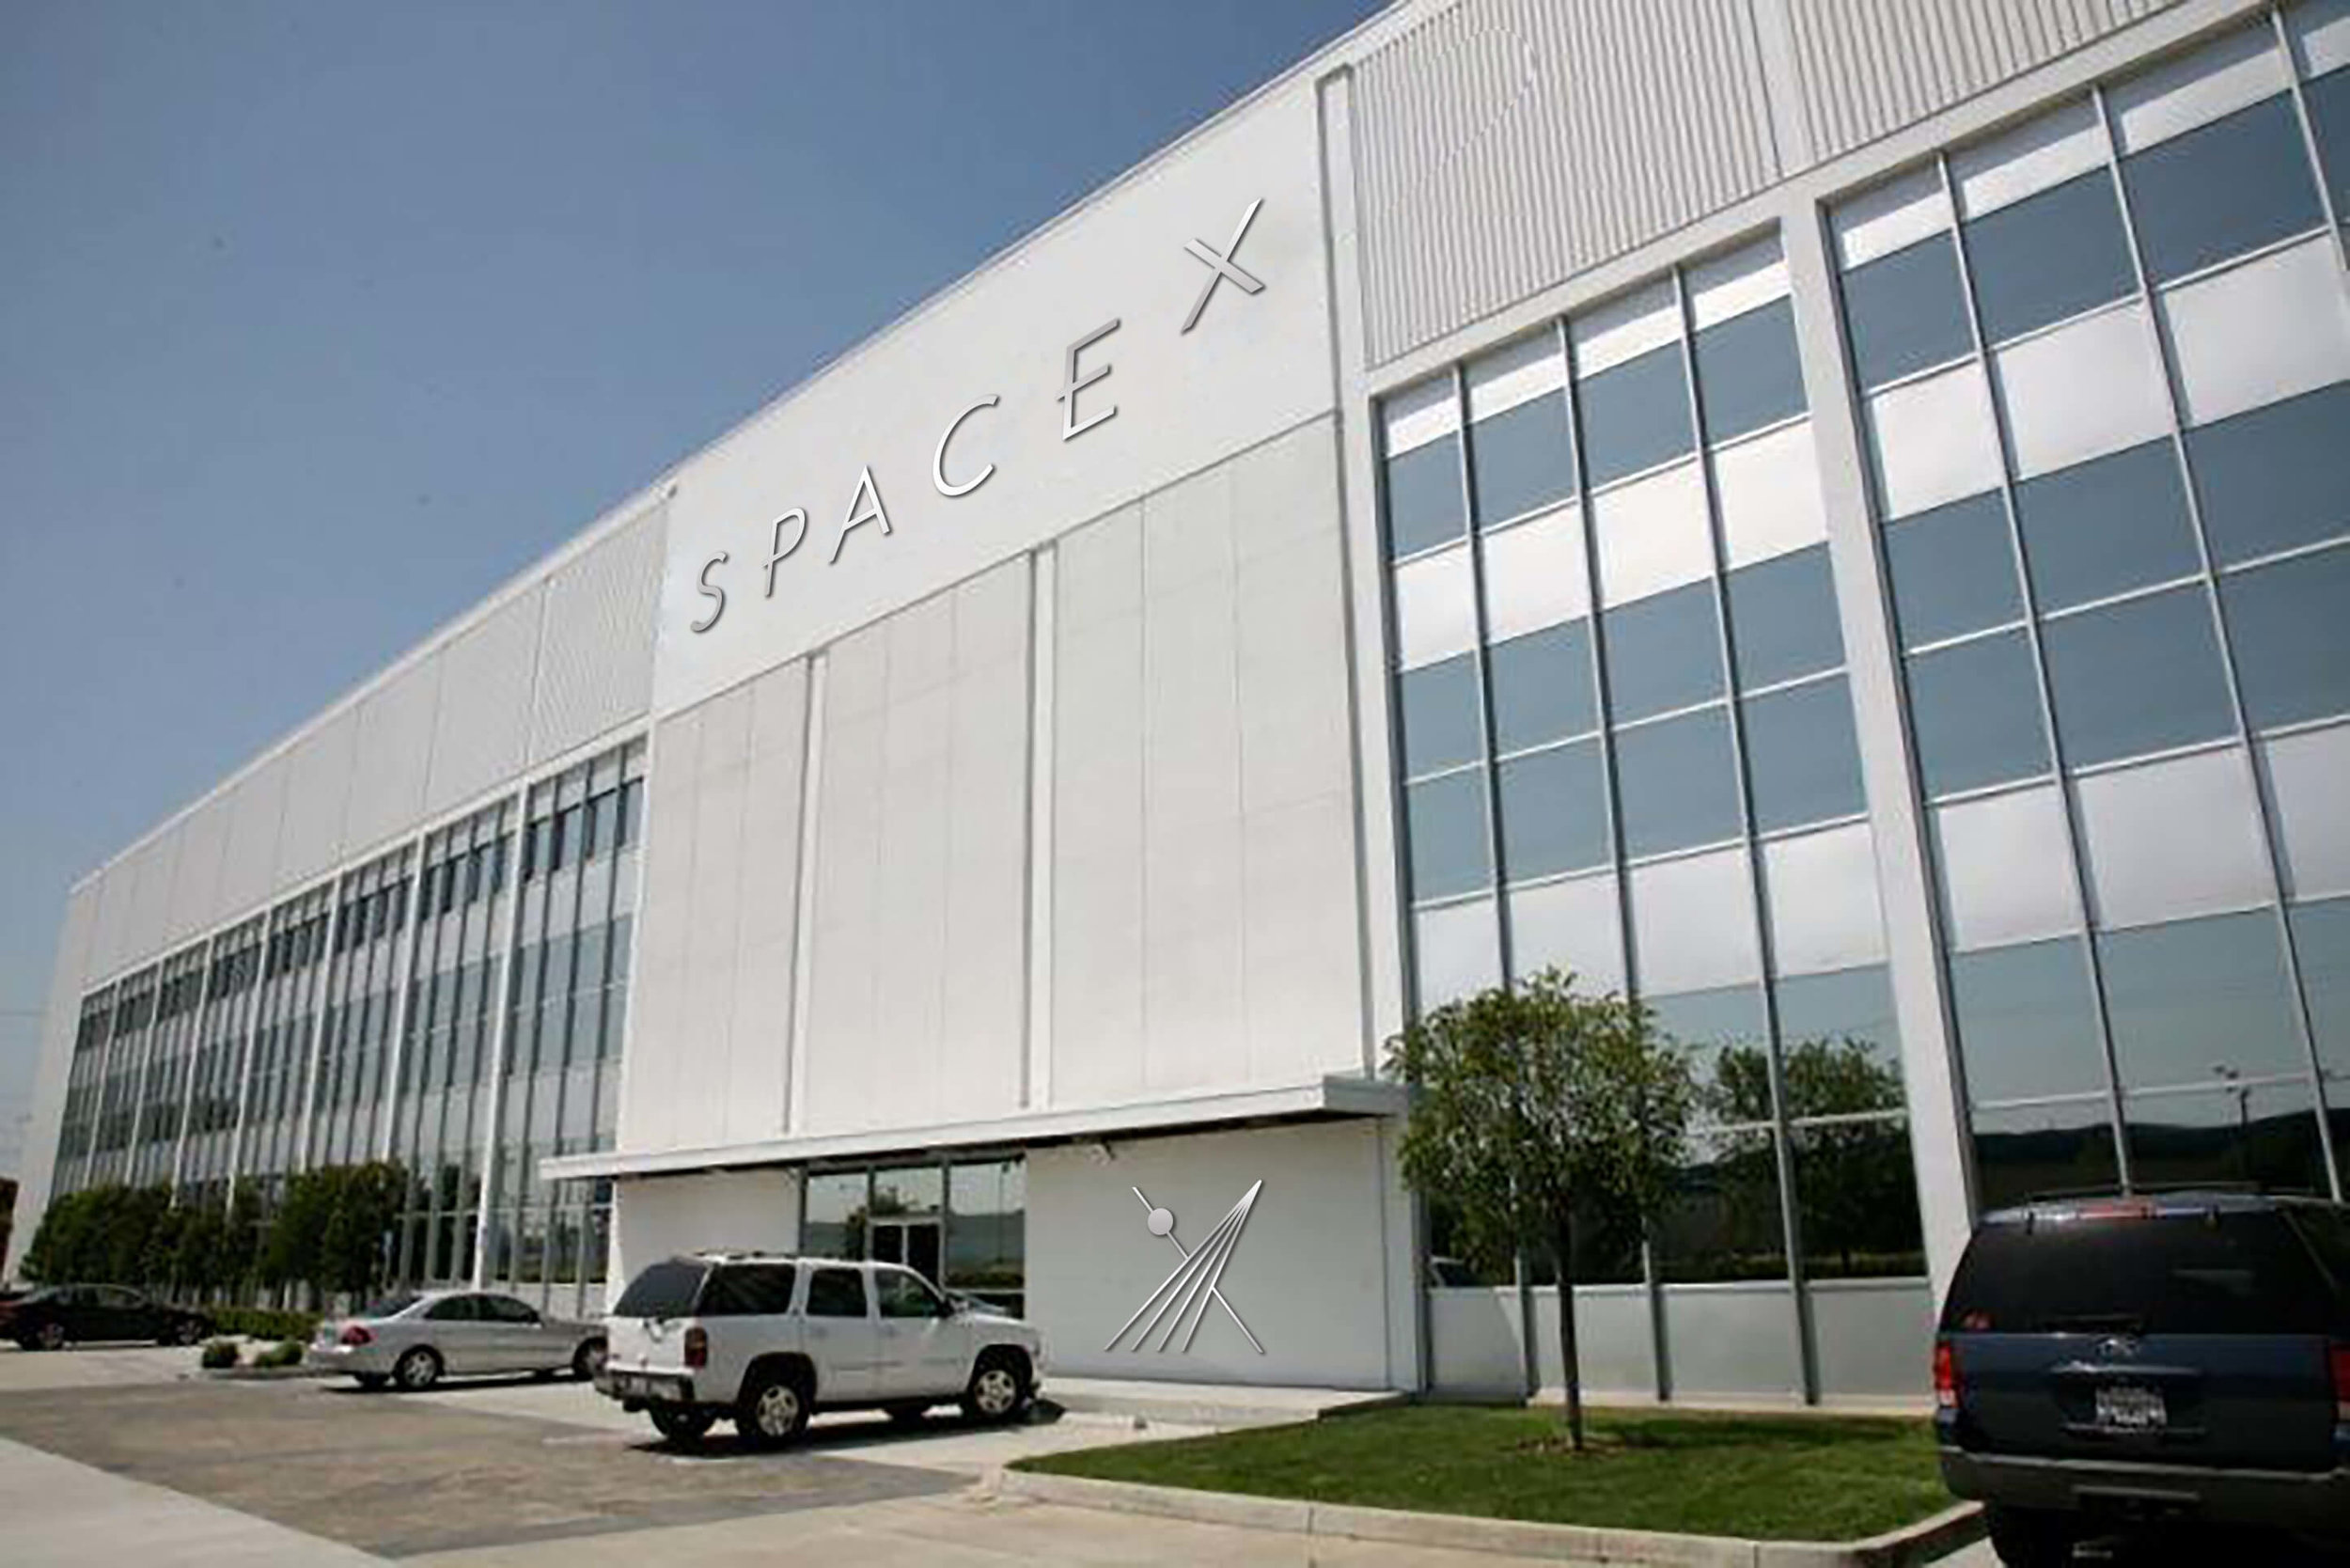 spacex-headquarters-a-550-000-square-foot-facility-in-hawthorne.jpg